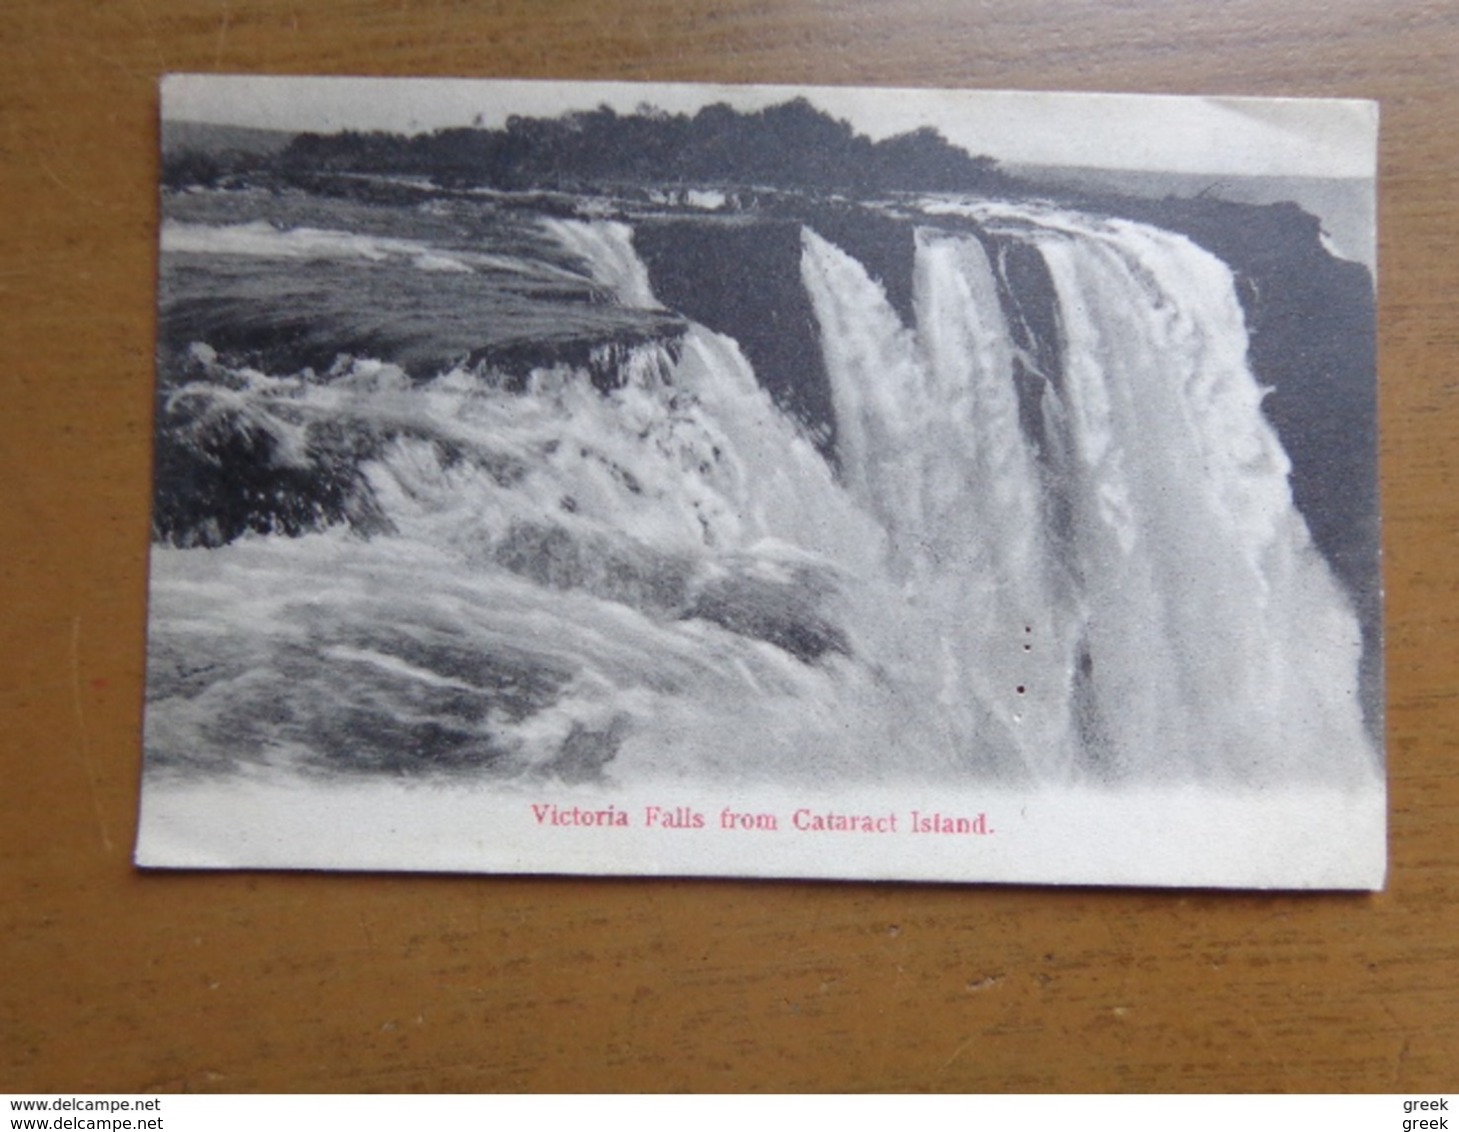 37 old cards of AFRICA (see pictures)